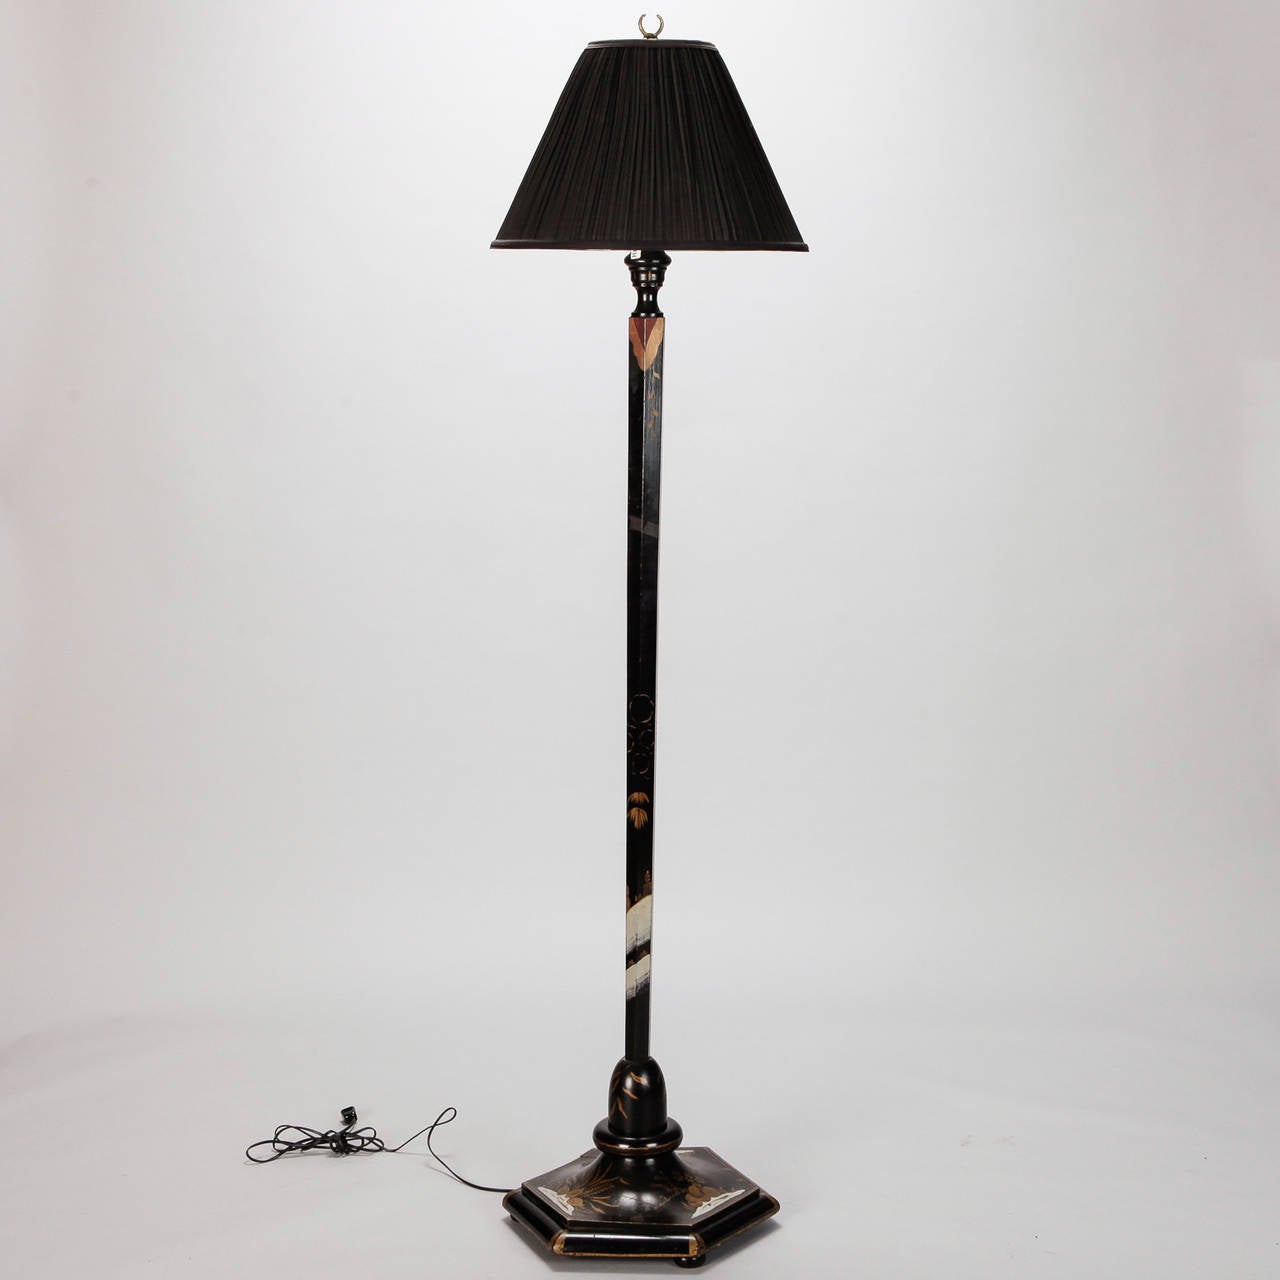 Circa 1920s English wood floor lamp with black painted and gilded finish in a Chinese motif. Octagonal base, black fabric shade and new wiring for US electrical standards.  

Shade:  18” w x 13” h x 18” d